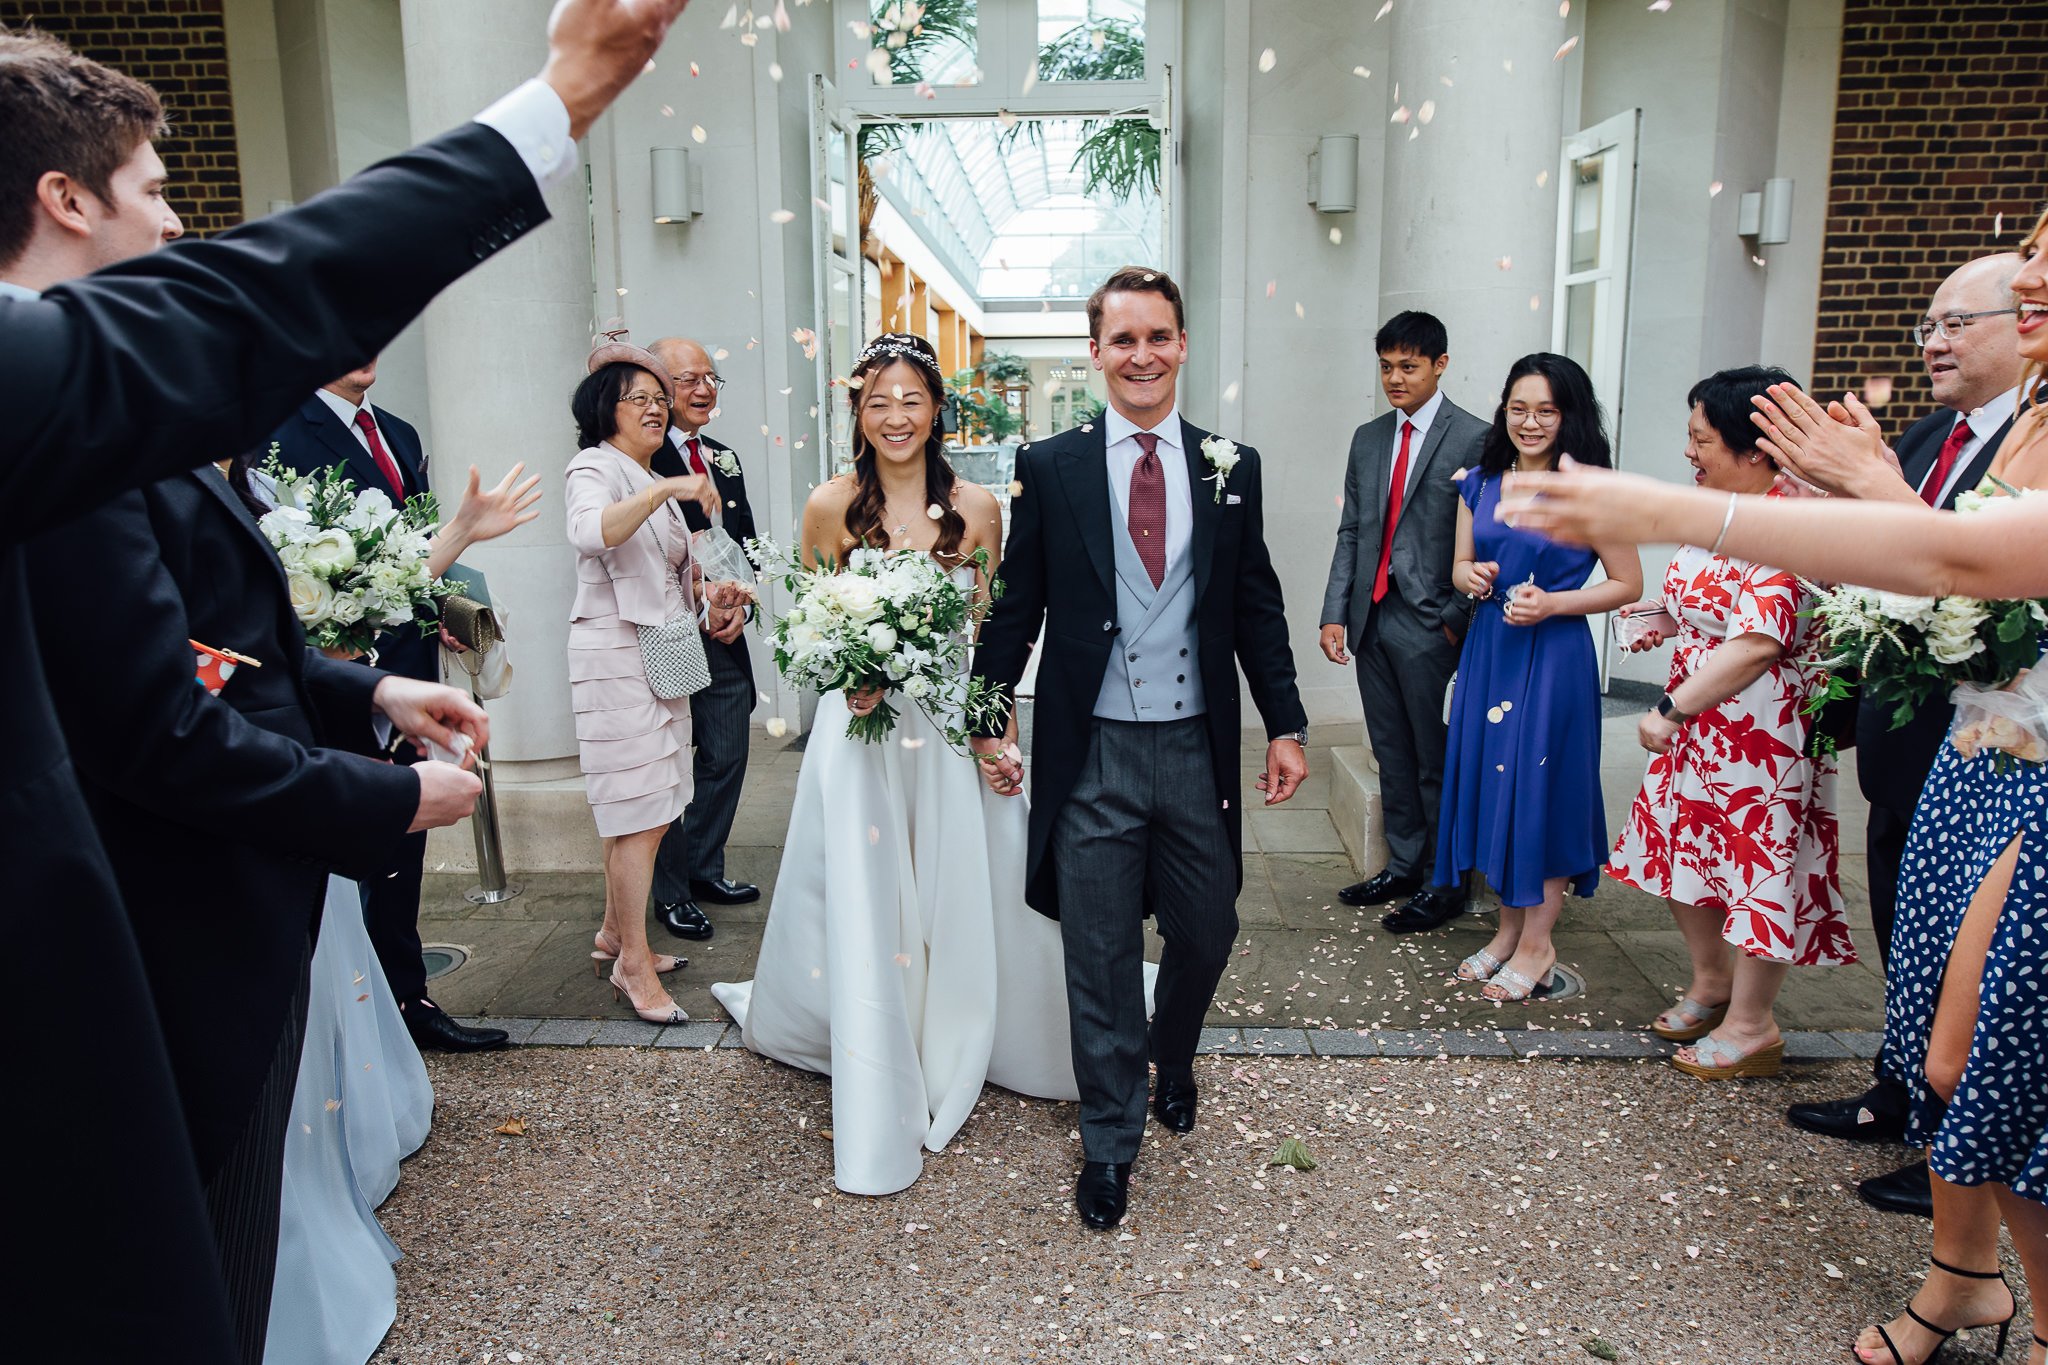  Bride and Groom have confetti thrown at them after their wedding ceremony at the Hurlingham Club 